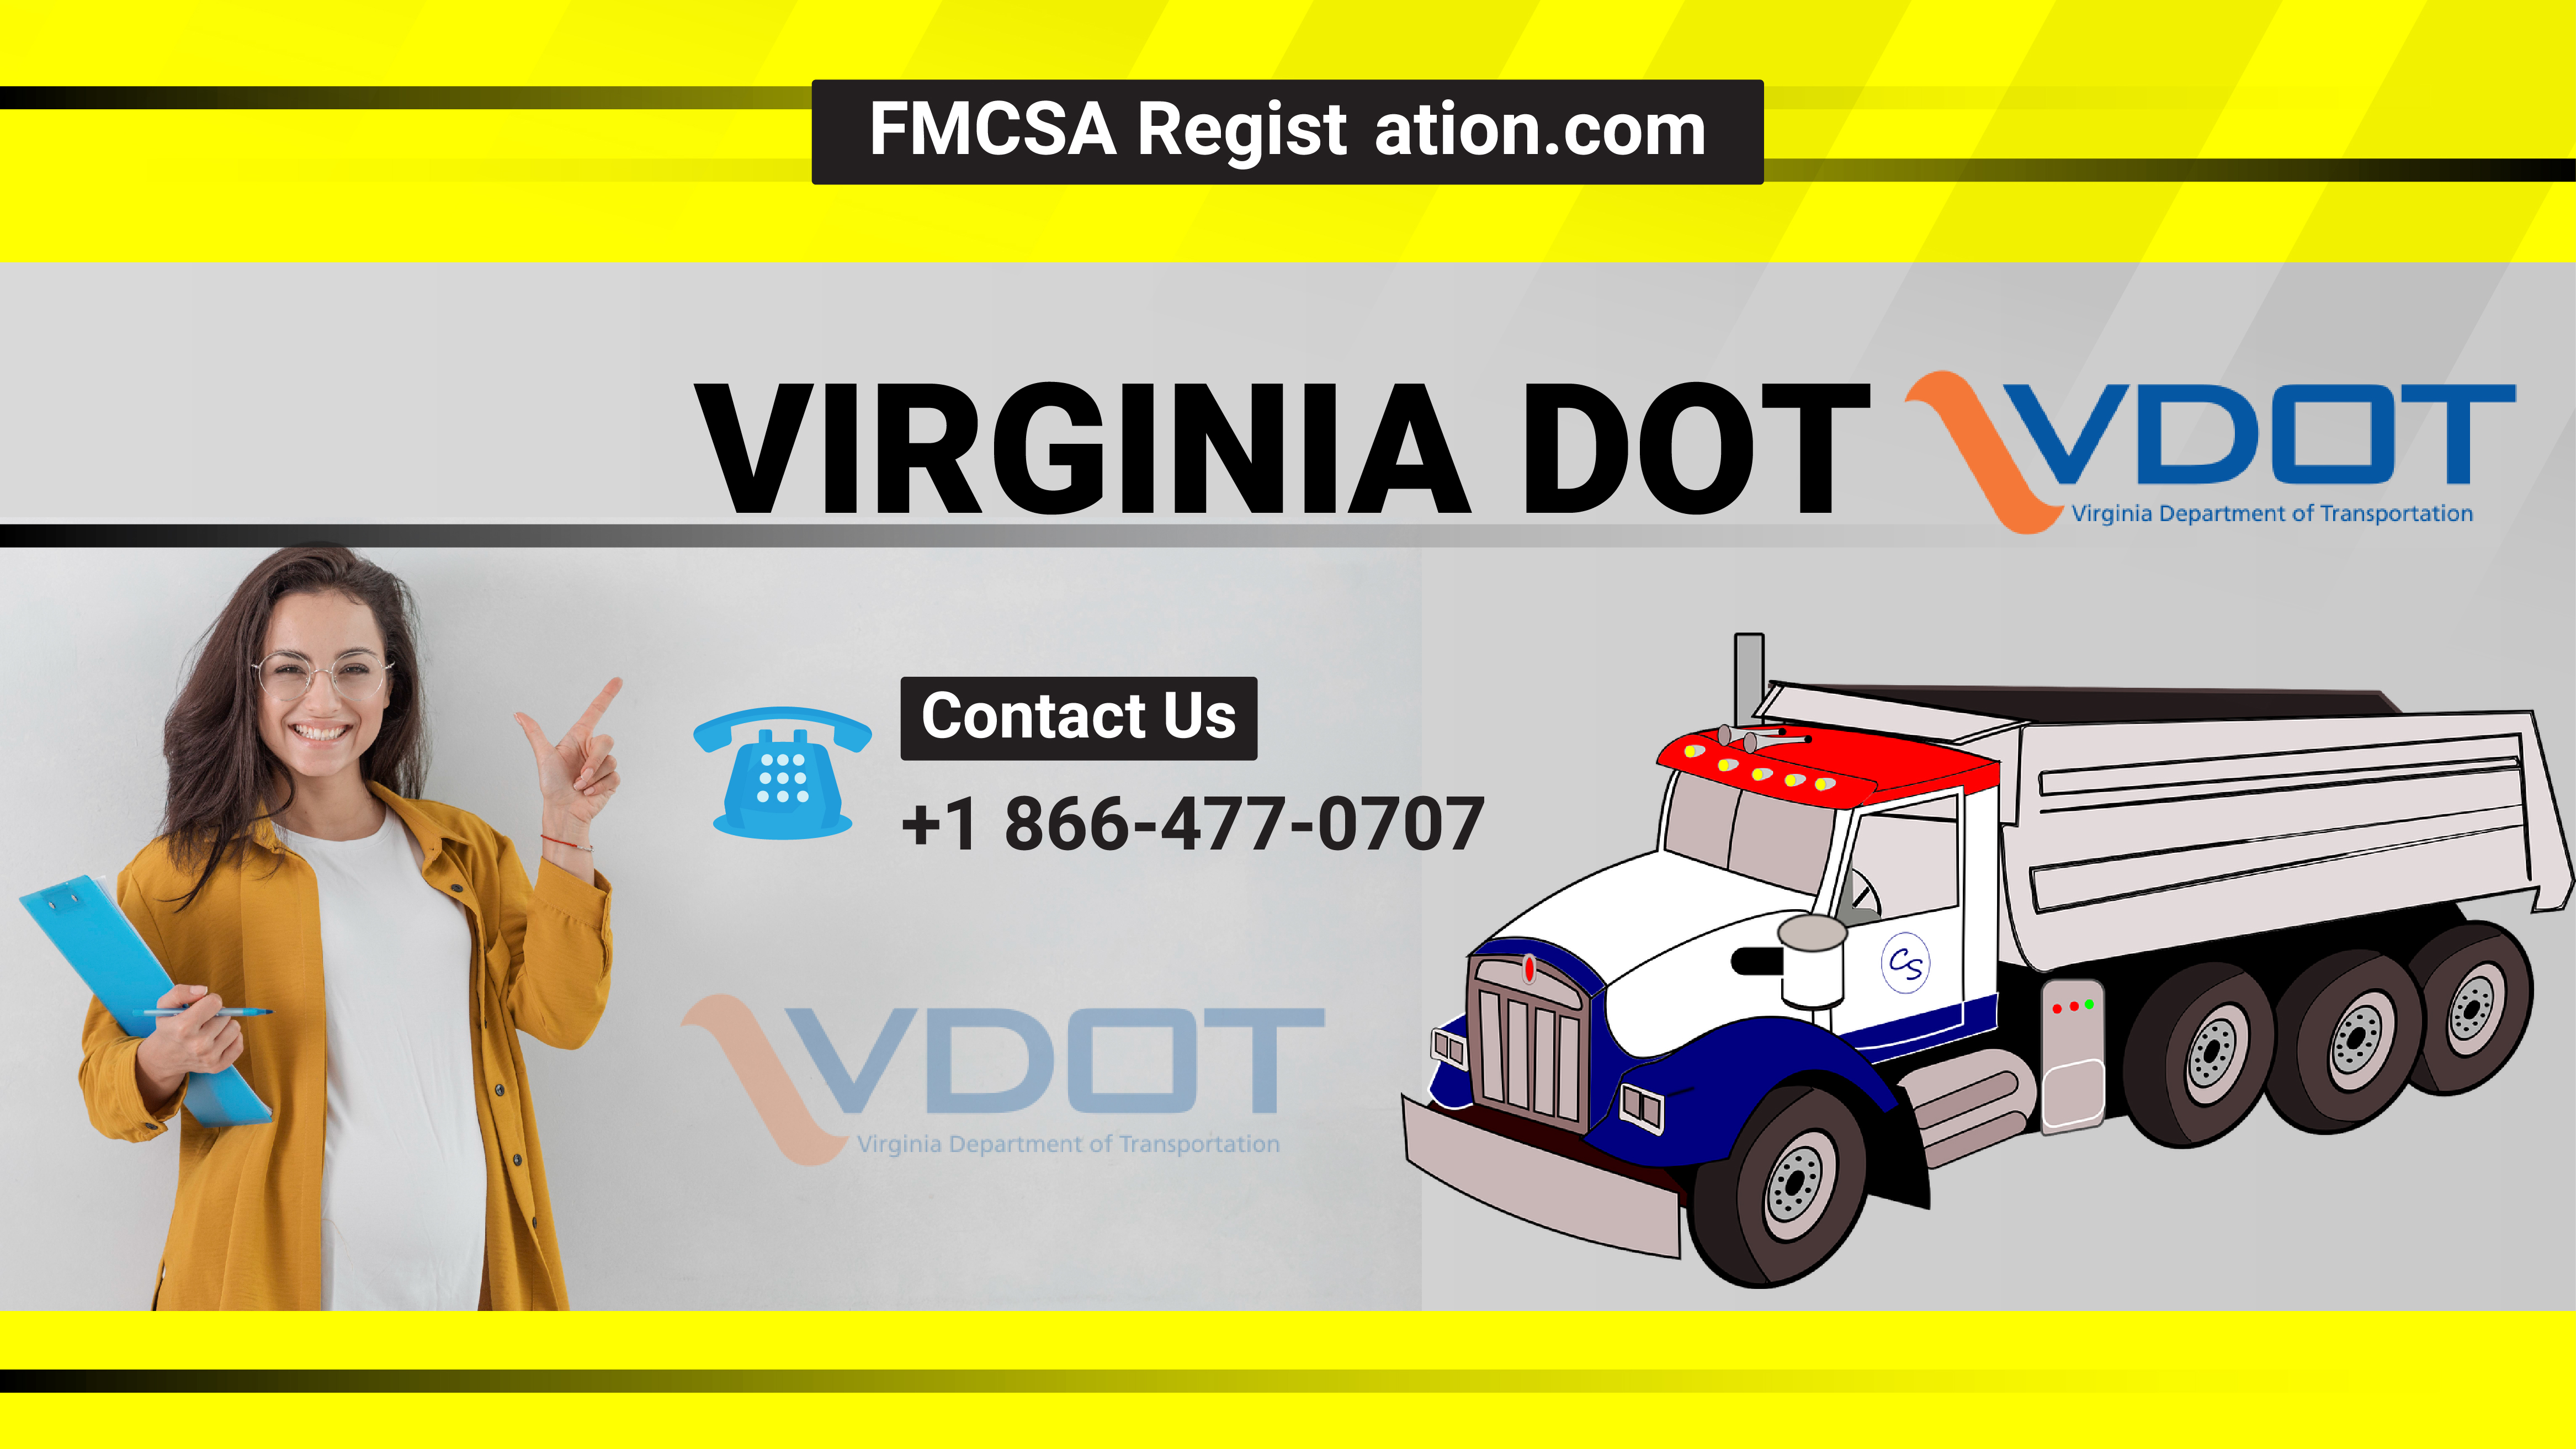 Virginia DOT Number product image reference 3